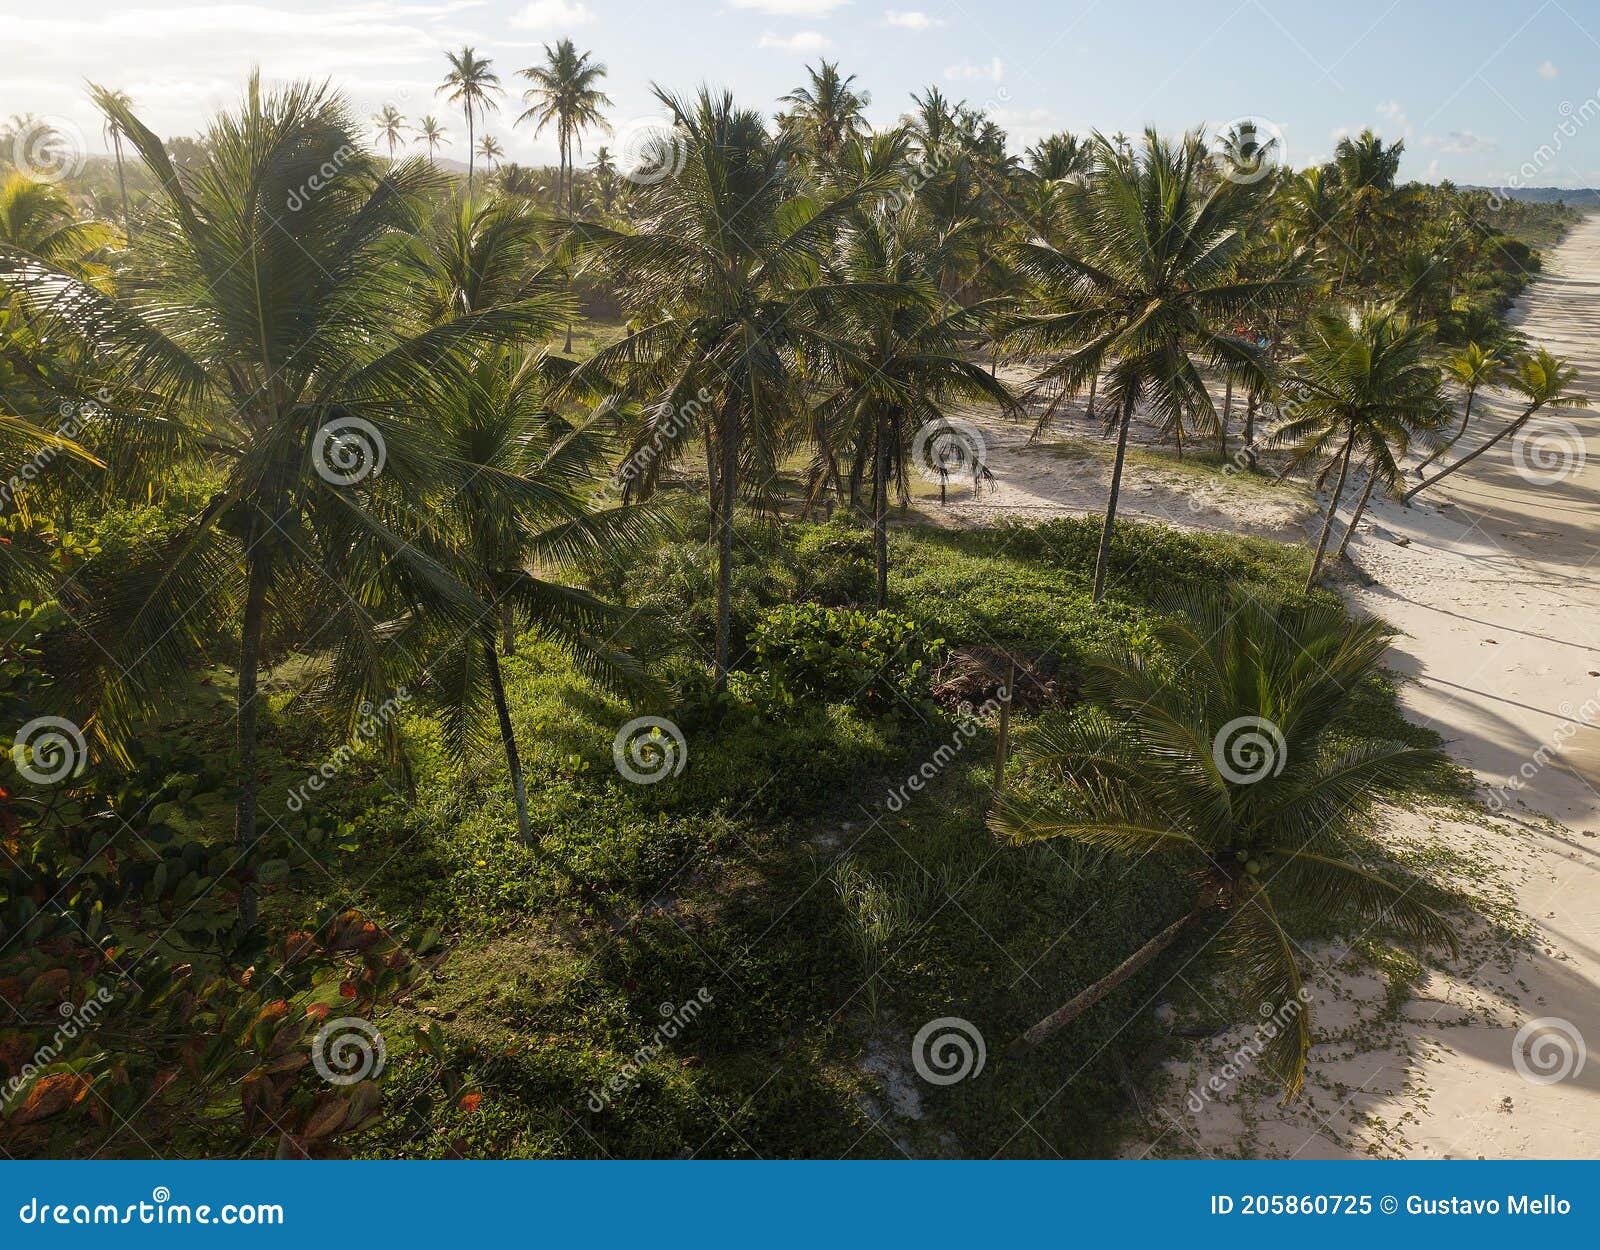 paisagem tropical coconut trees with the sunshine